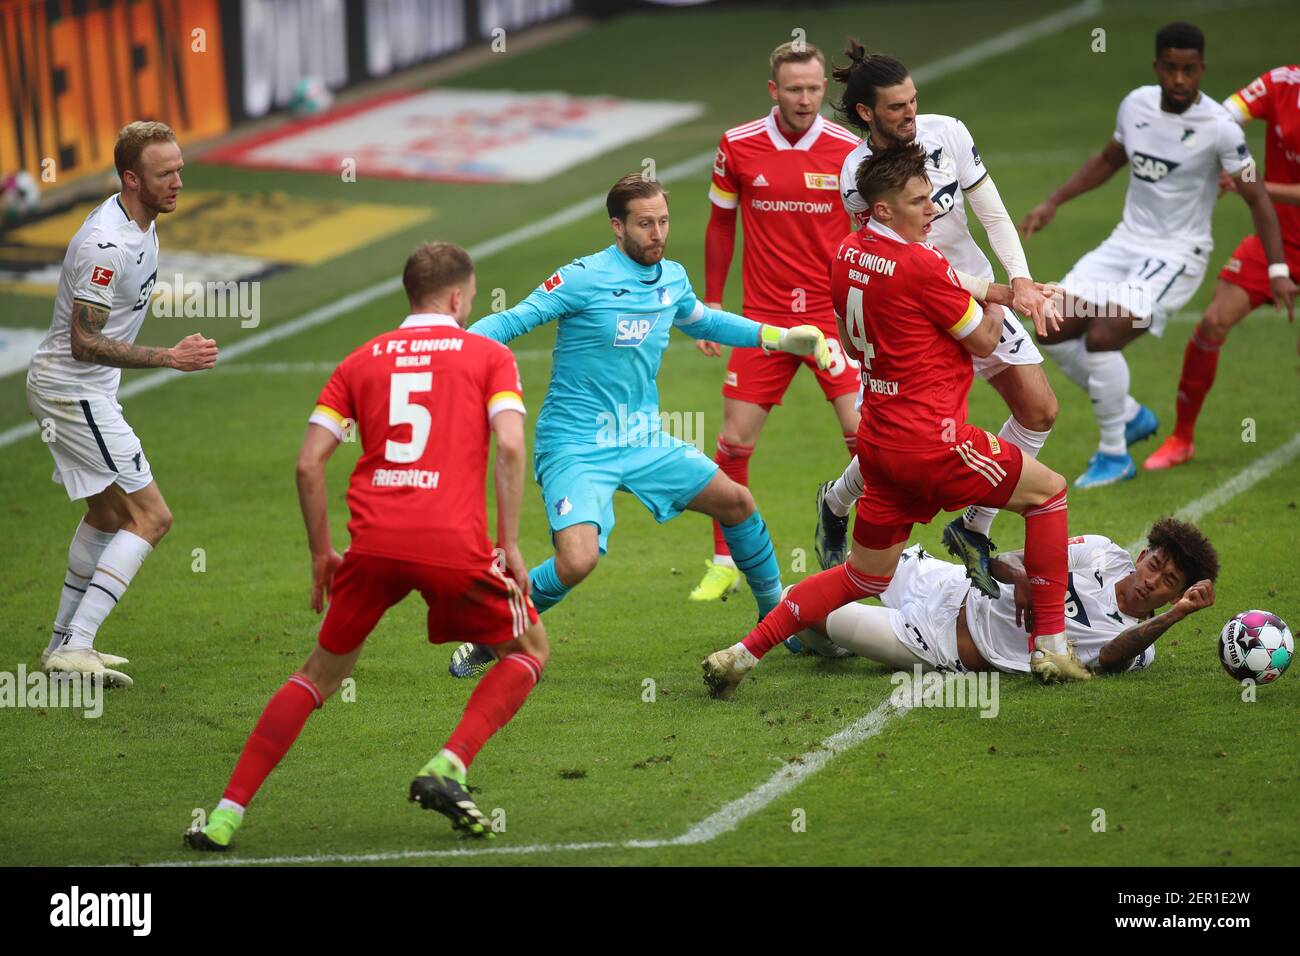 Berlin, Germany. 28th Feb, 2021. Football, Bundesliga, 1.FC Union Berlin - TSG Hoffenheim, Matchday 23, Stadion An der Alten Försterei: Hoffenheim goalkeeper Oliver Baumann (3rd from left) tries to keep an overview in front of his goal. IMPORTANT NOTE: In accordance with the regulations of the DFL Deutsche Fußball Liga and the DFB Deutscher Fußball-Bund, it is prohibited to use or have used photographs taken in the stadium and/or of the match in the form of sequence pictures and/or video-like photo series. Credit: Andreas Gora/dpa-POOL/dpa/Alamy Live News Stock Photo